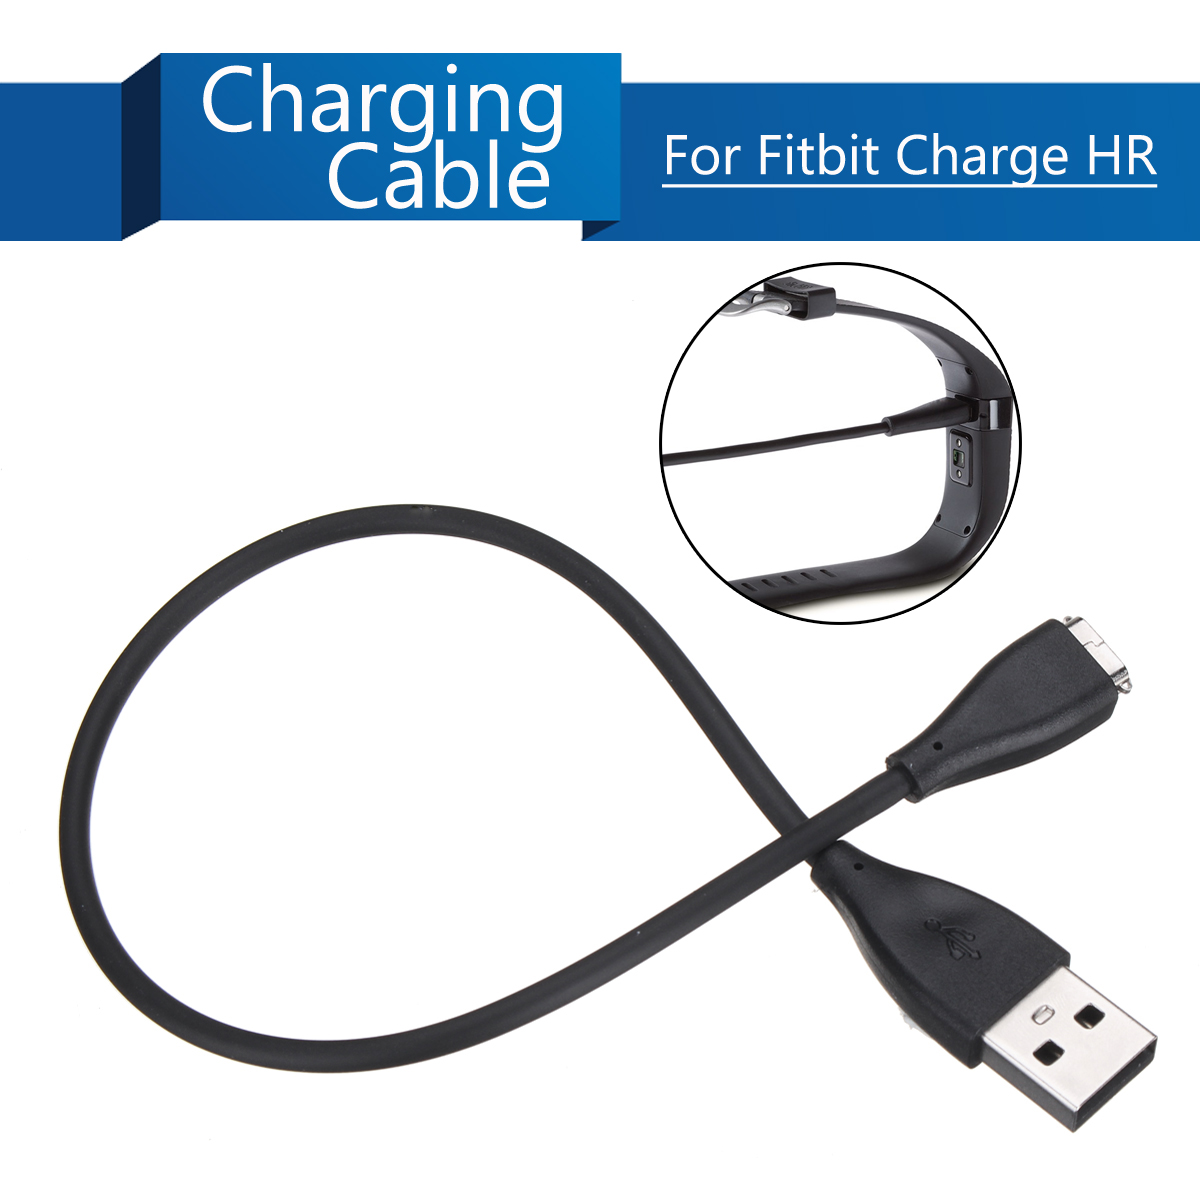 Replacement-Charging-Cable-USB-Charger-Cord-for-Fitbit-Charge-HR-Wristband-1266100